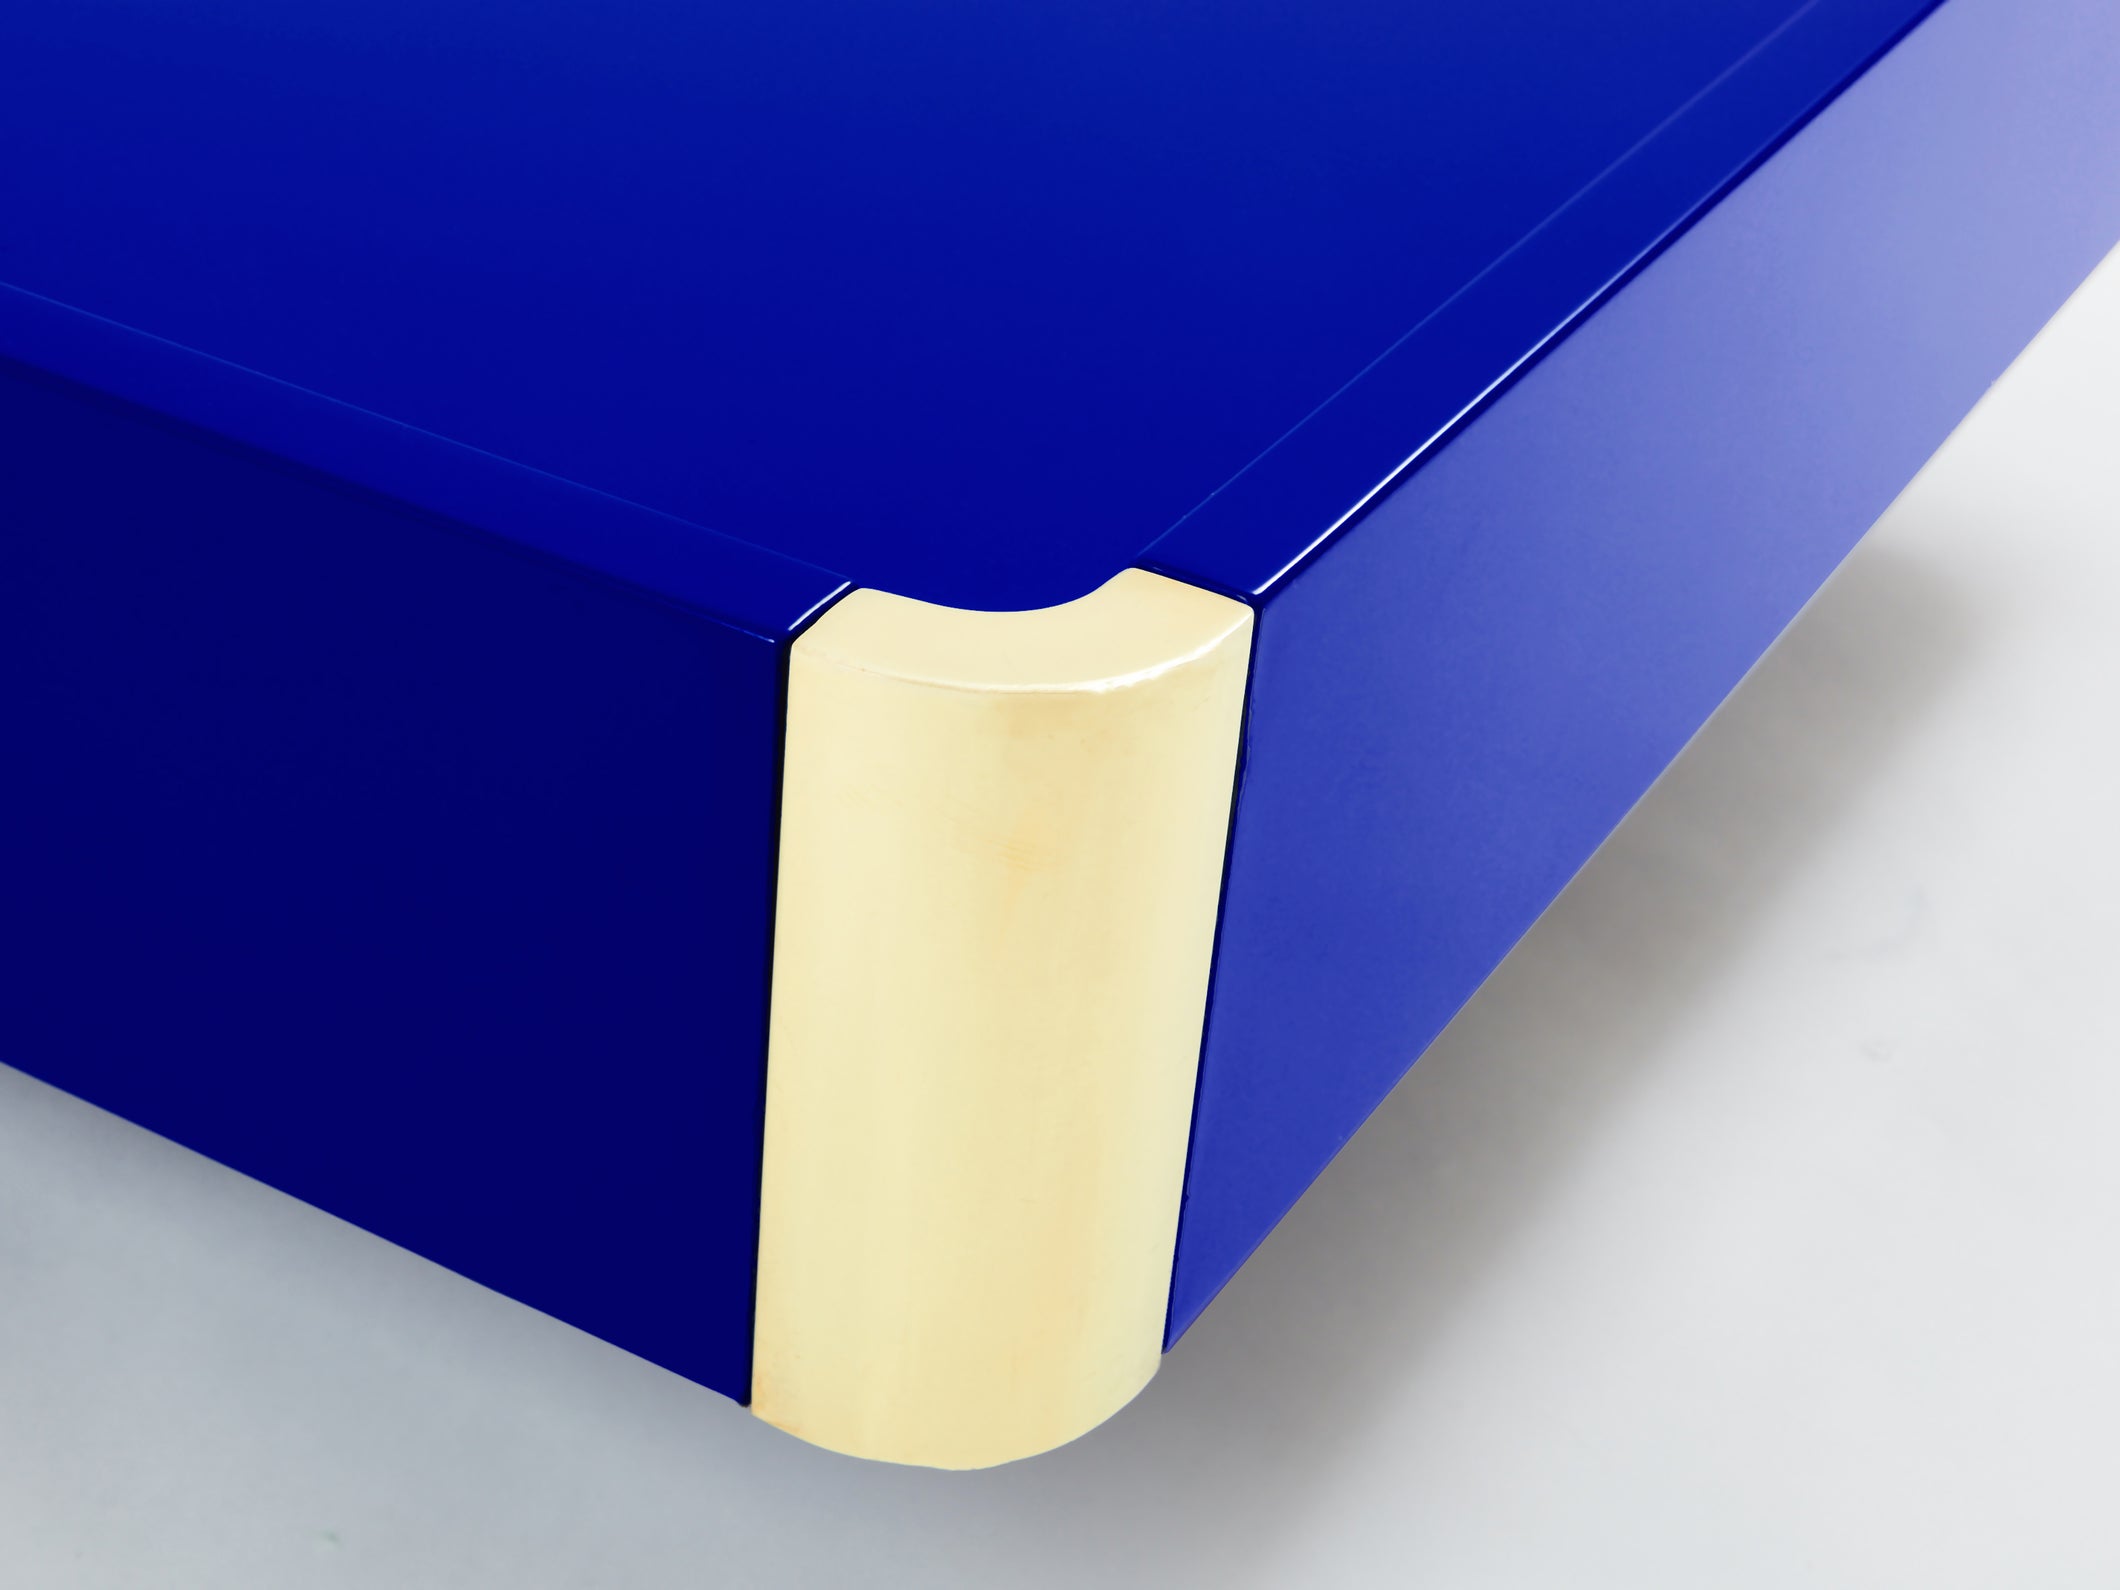 Willy Rizzo Majorelle blue lacquer and brass coffee table 1970s